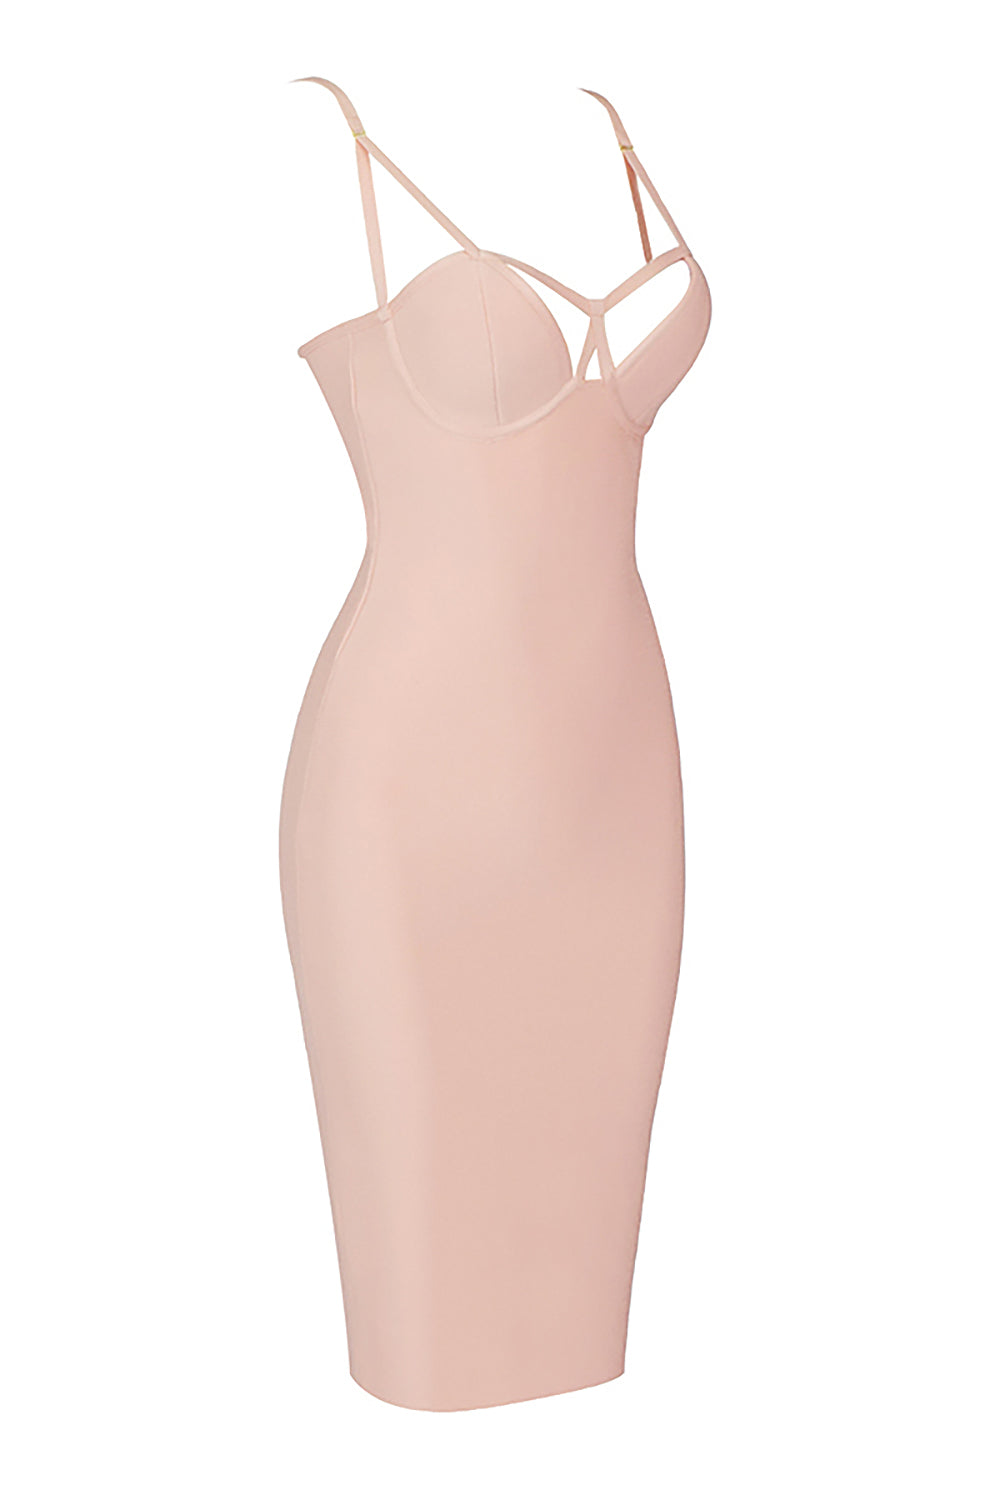 Nude Strappy Hollow Out Bandage Dress - Chicida